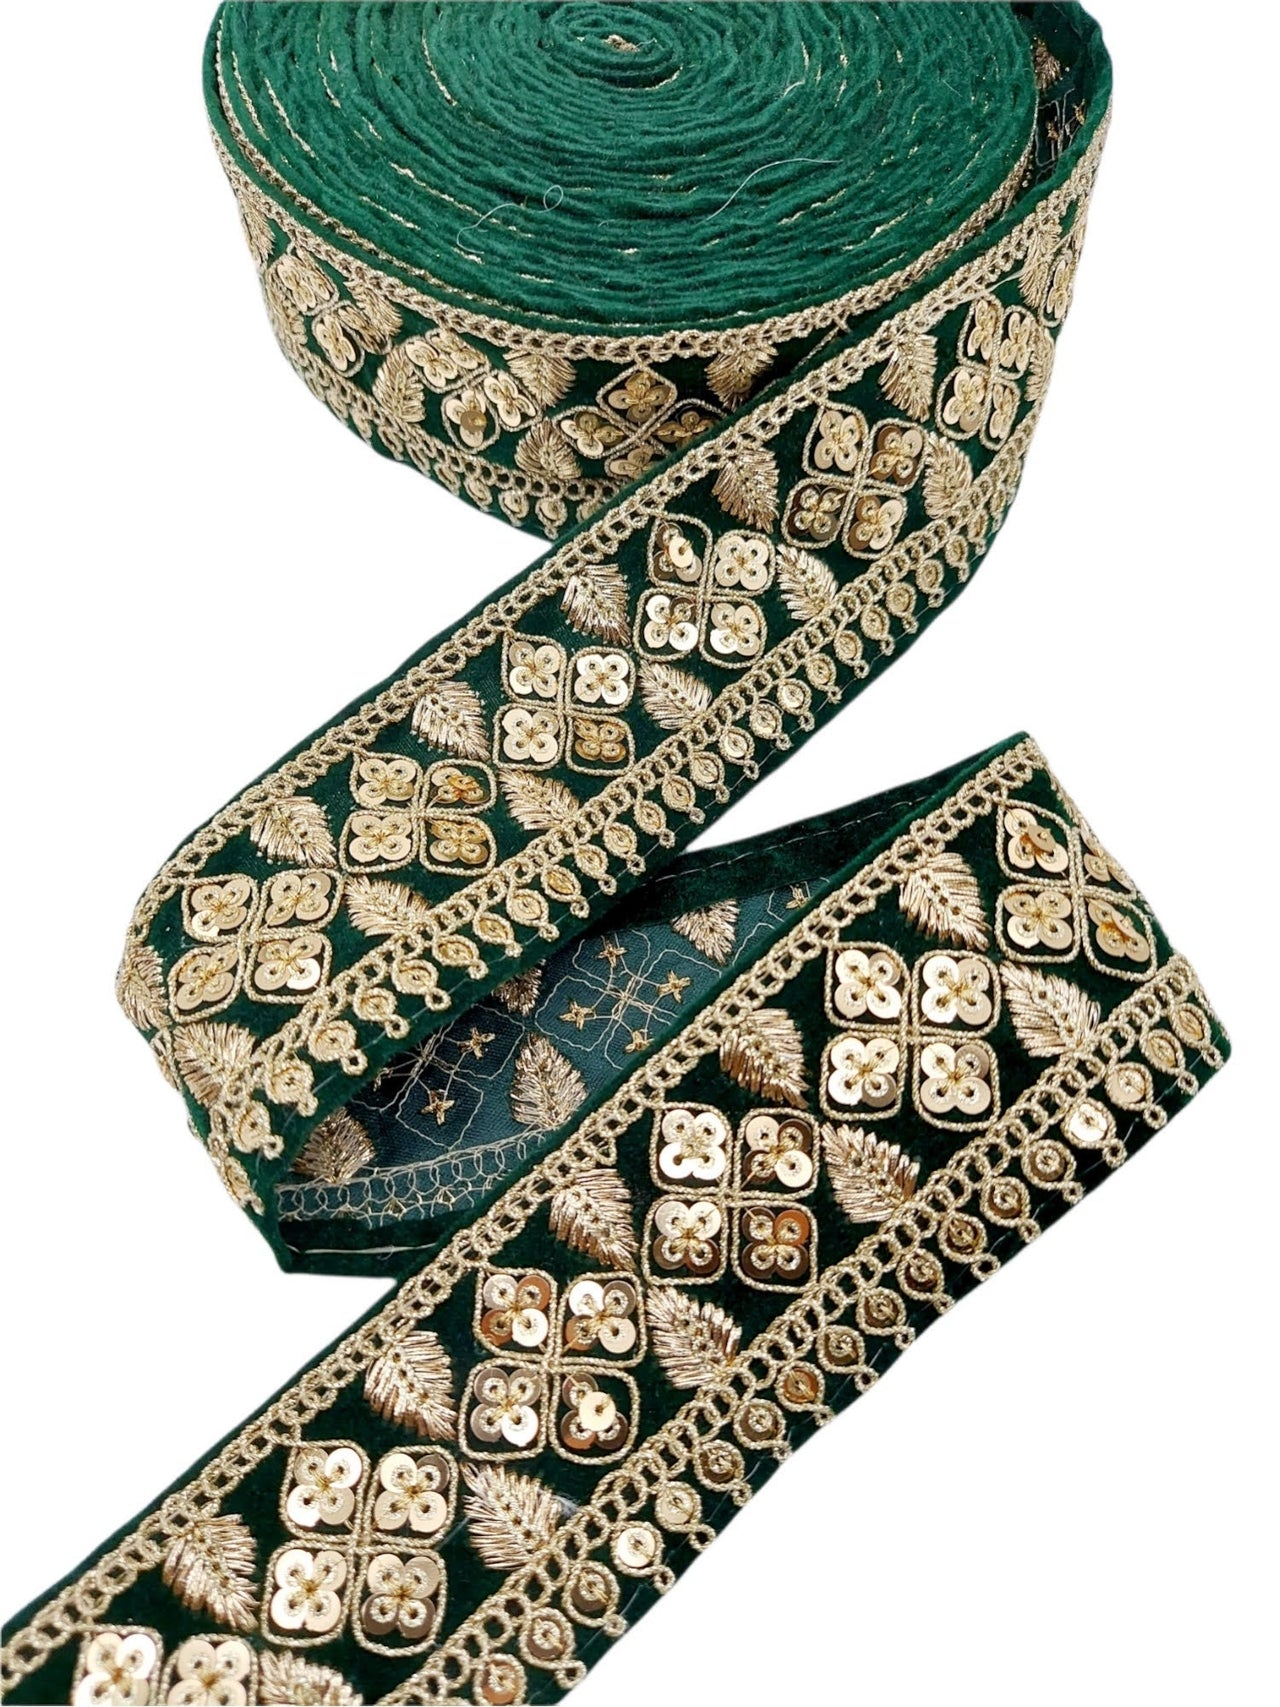 Velvet Fabric Sari Border Trim With Gold Sequins Embroidery, Trim By 9 Yards, Decorative Trimming